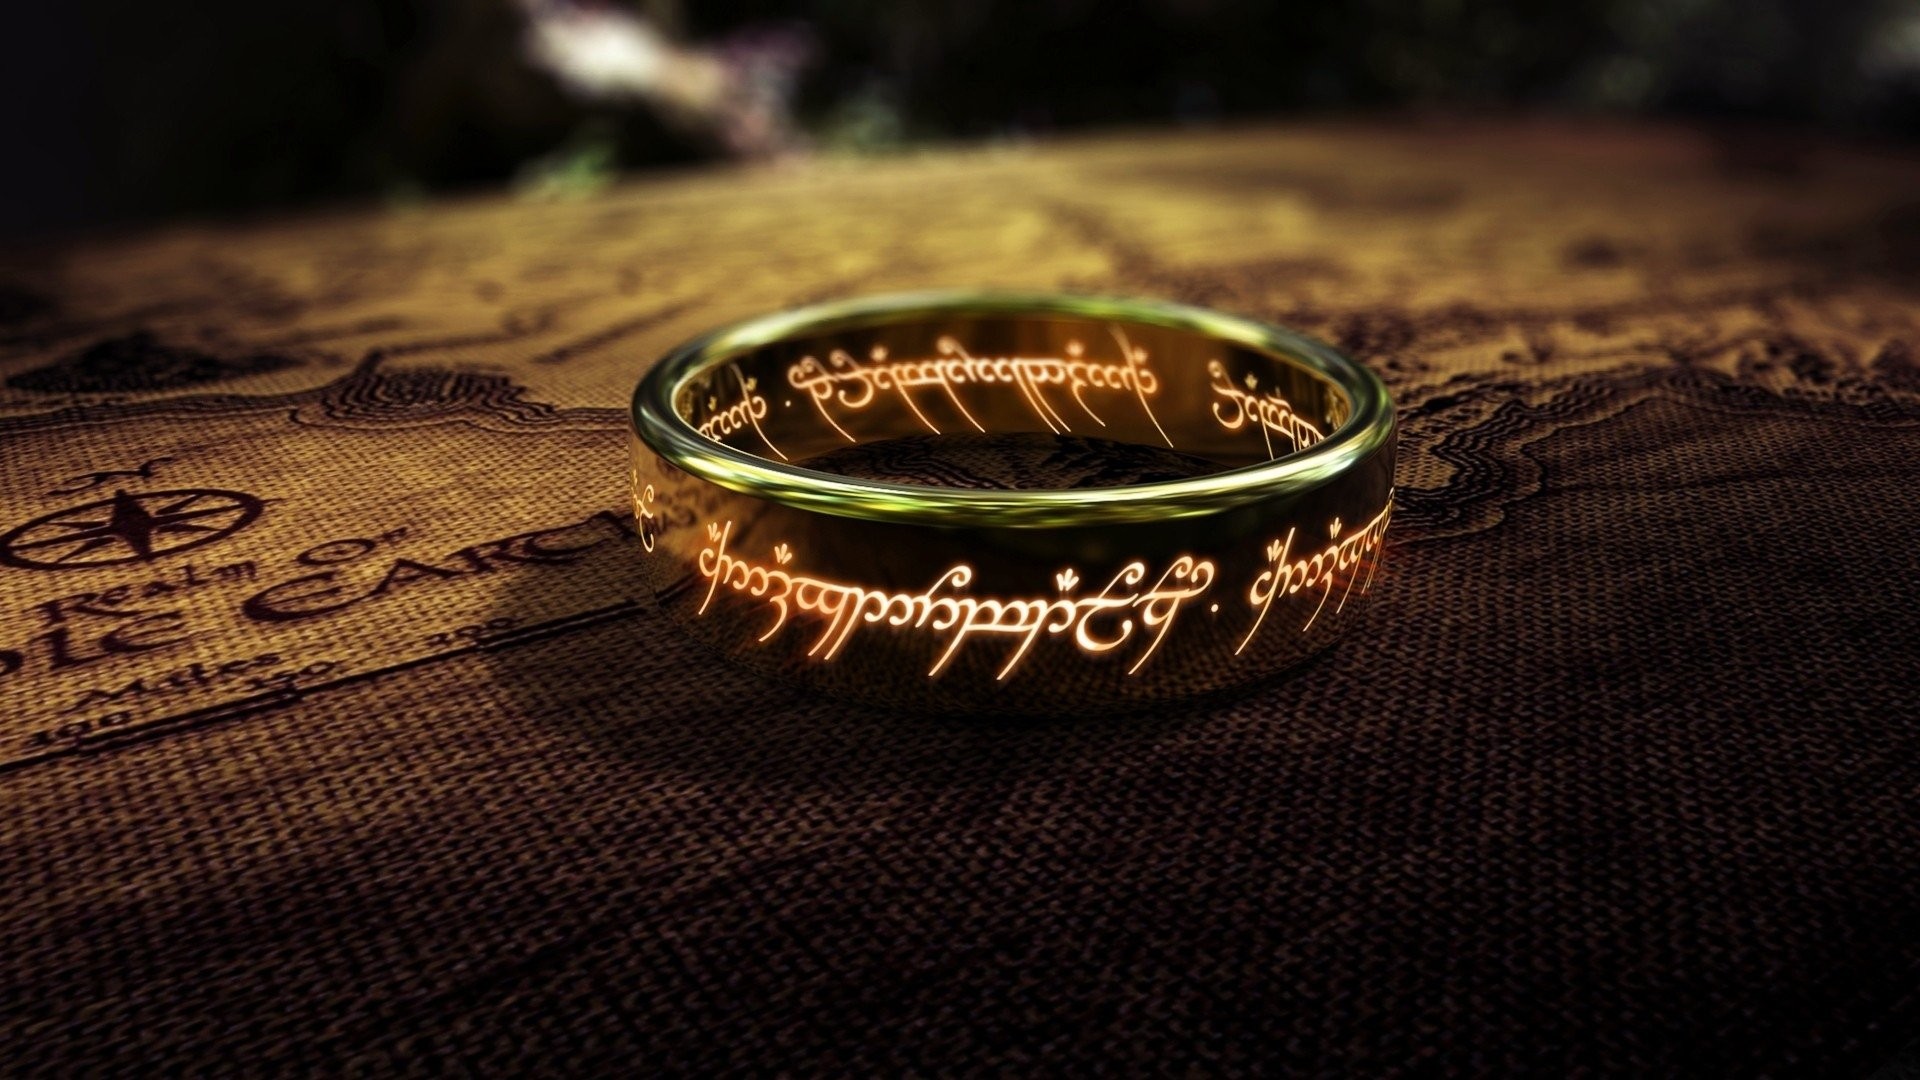 1920x1080 Filme - The Lord Of The Rings Ring Wallpaper